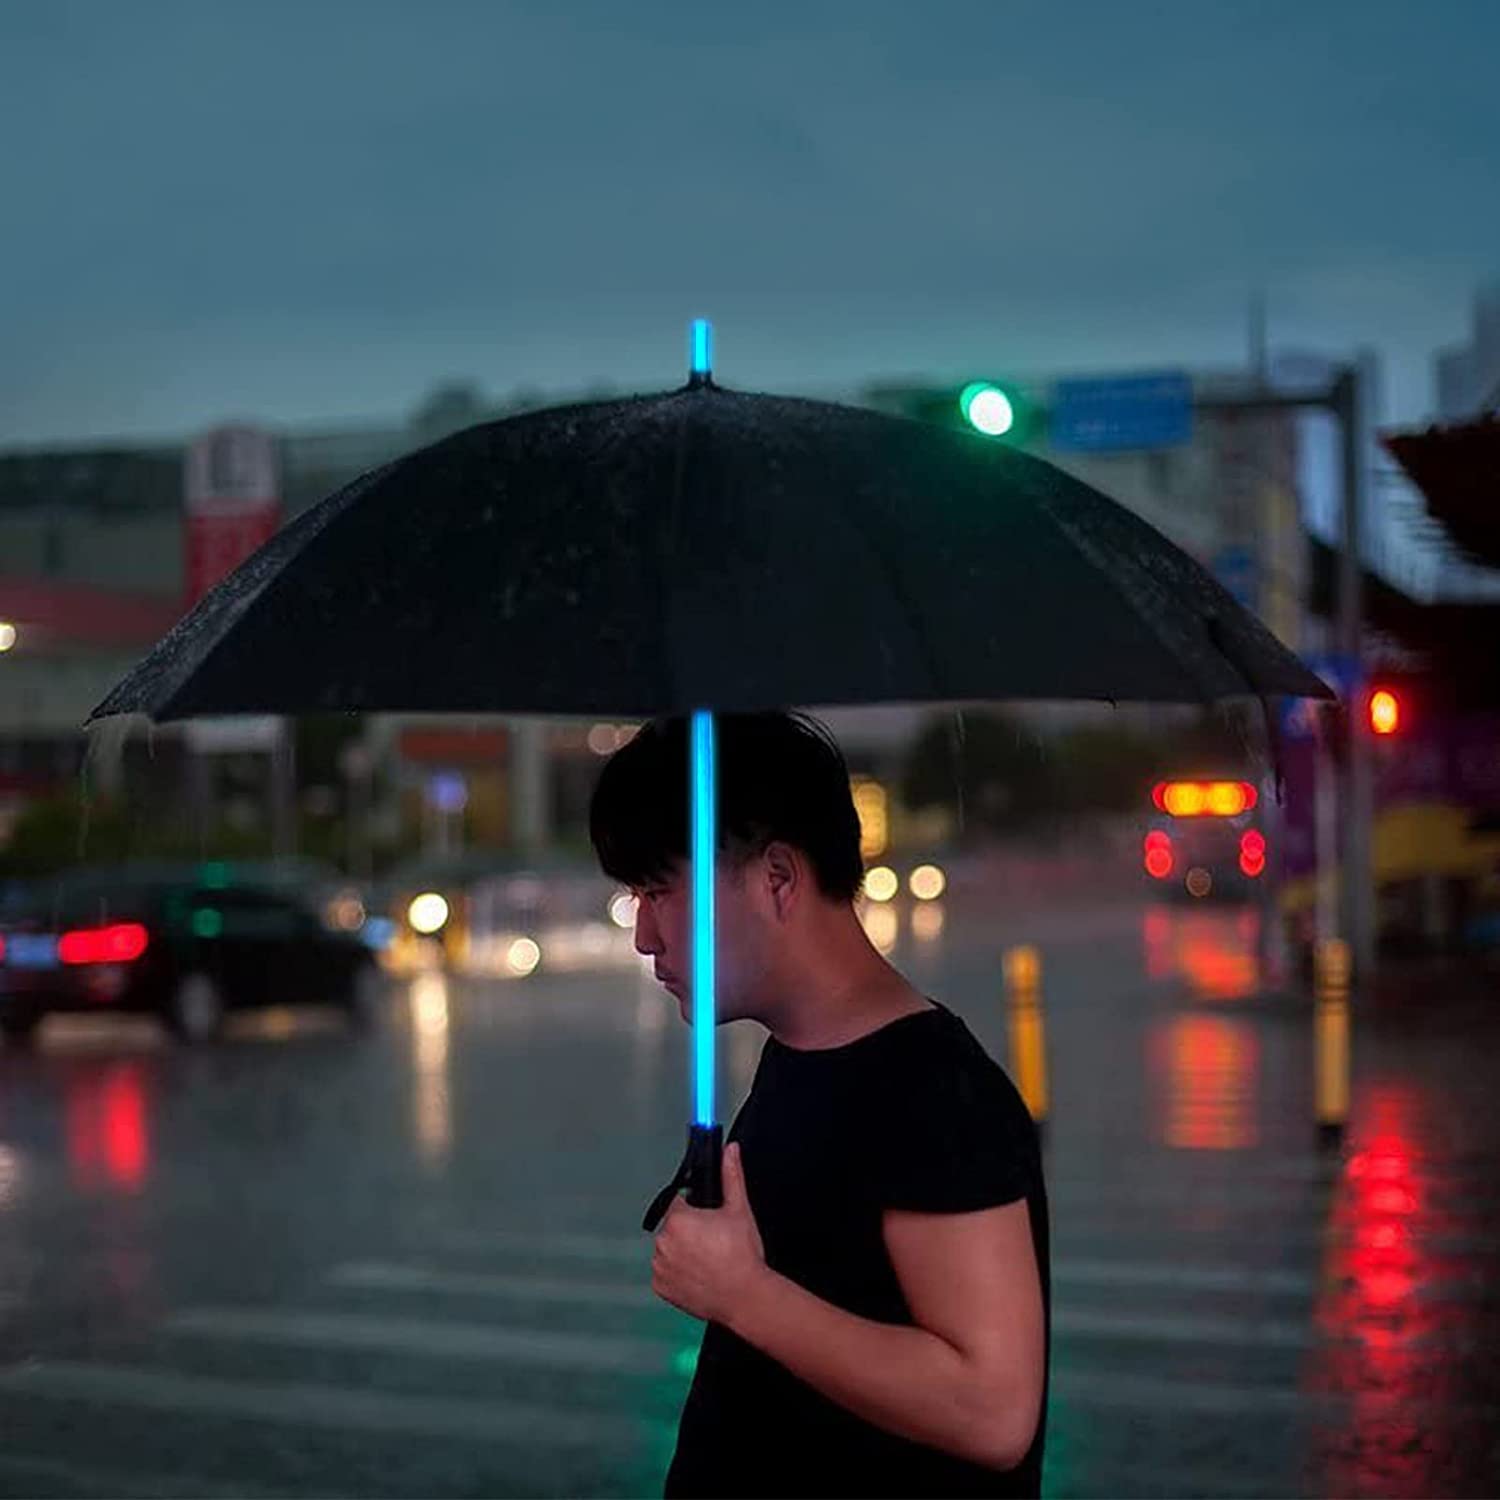 A person is walking outdoors holding a black umbrella which features a blue handle shaped like a lightsaber